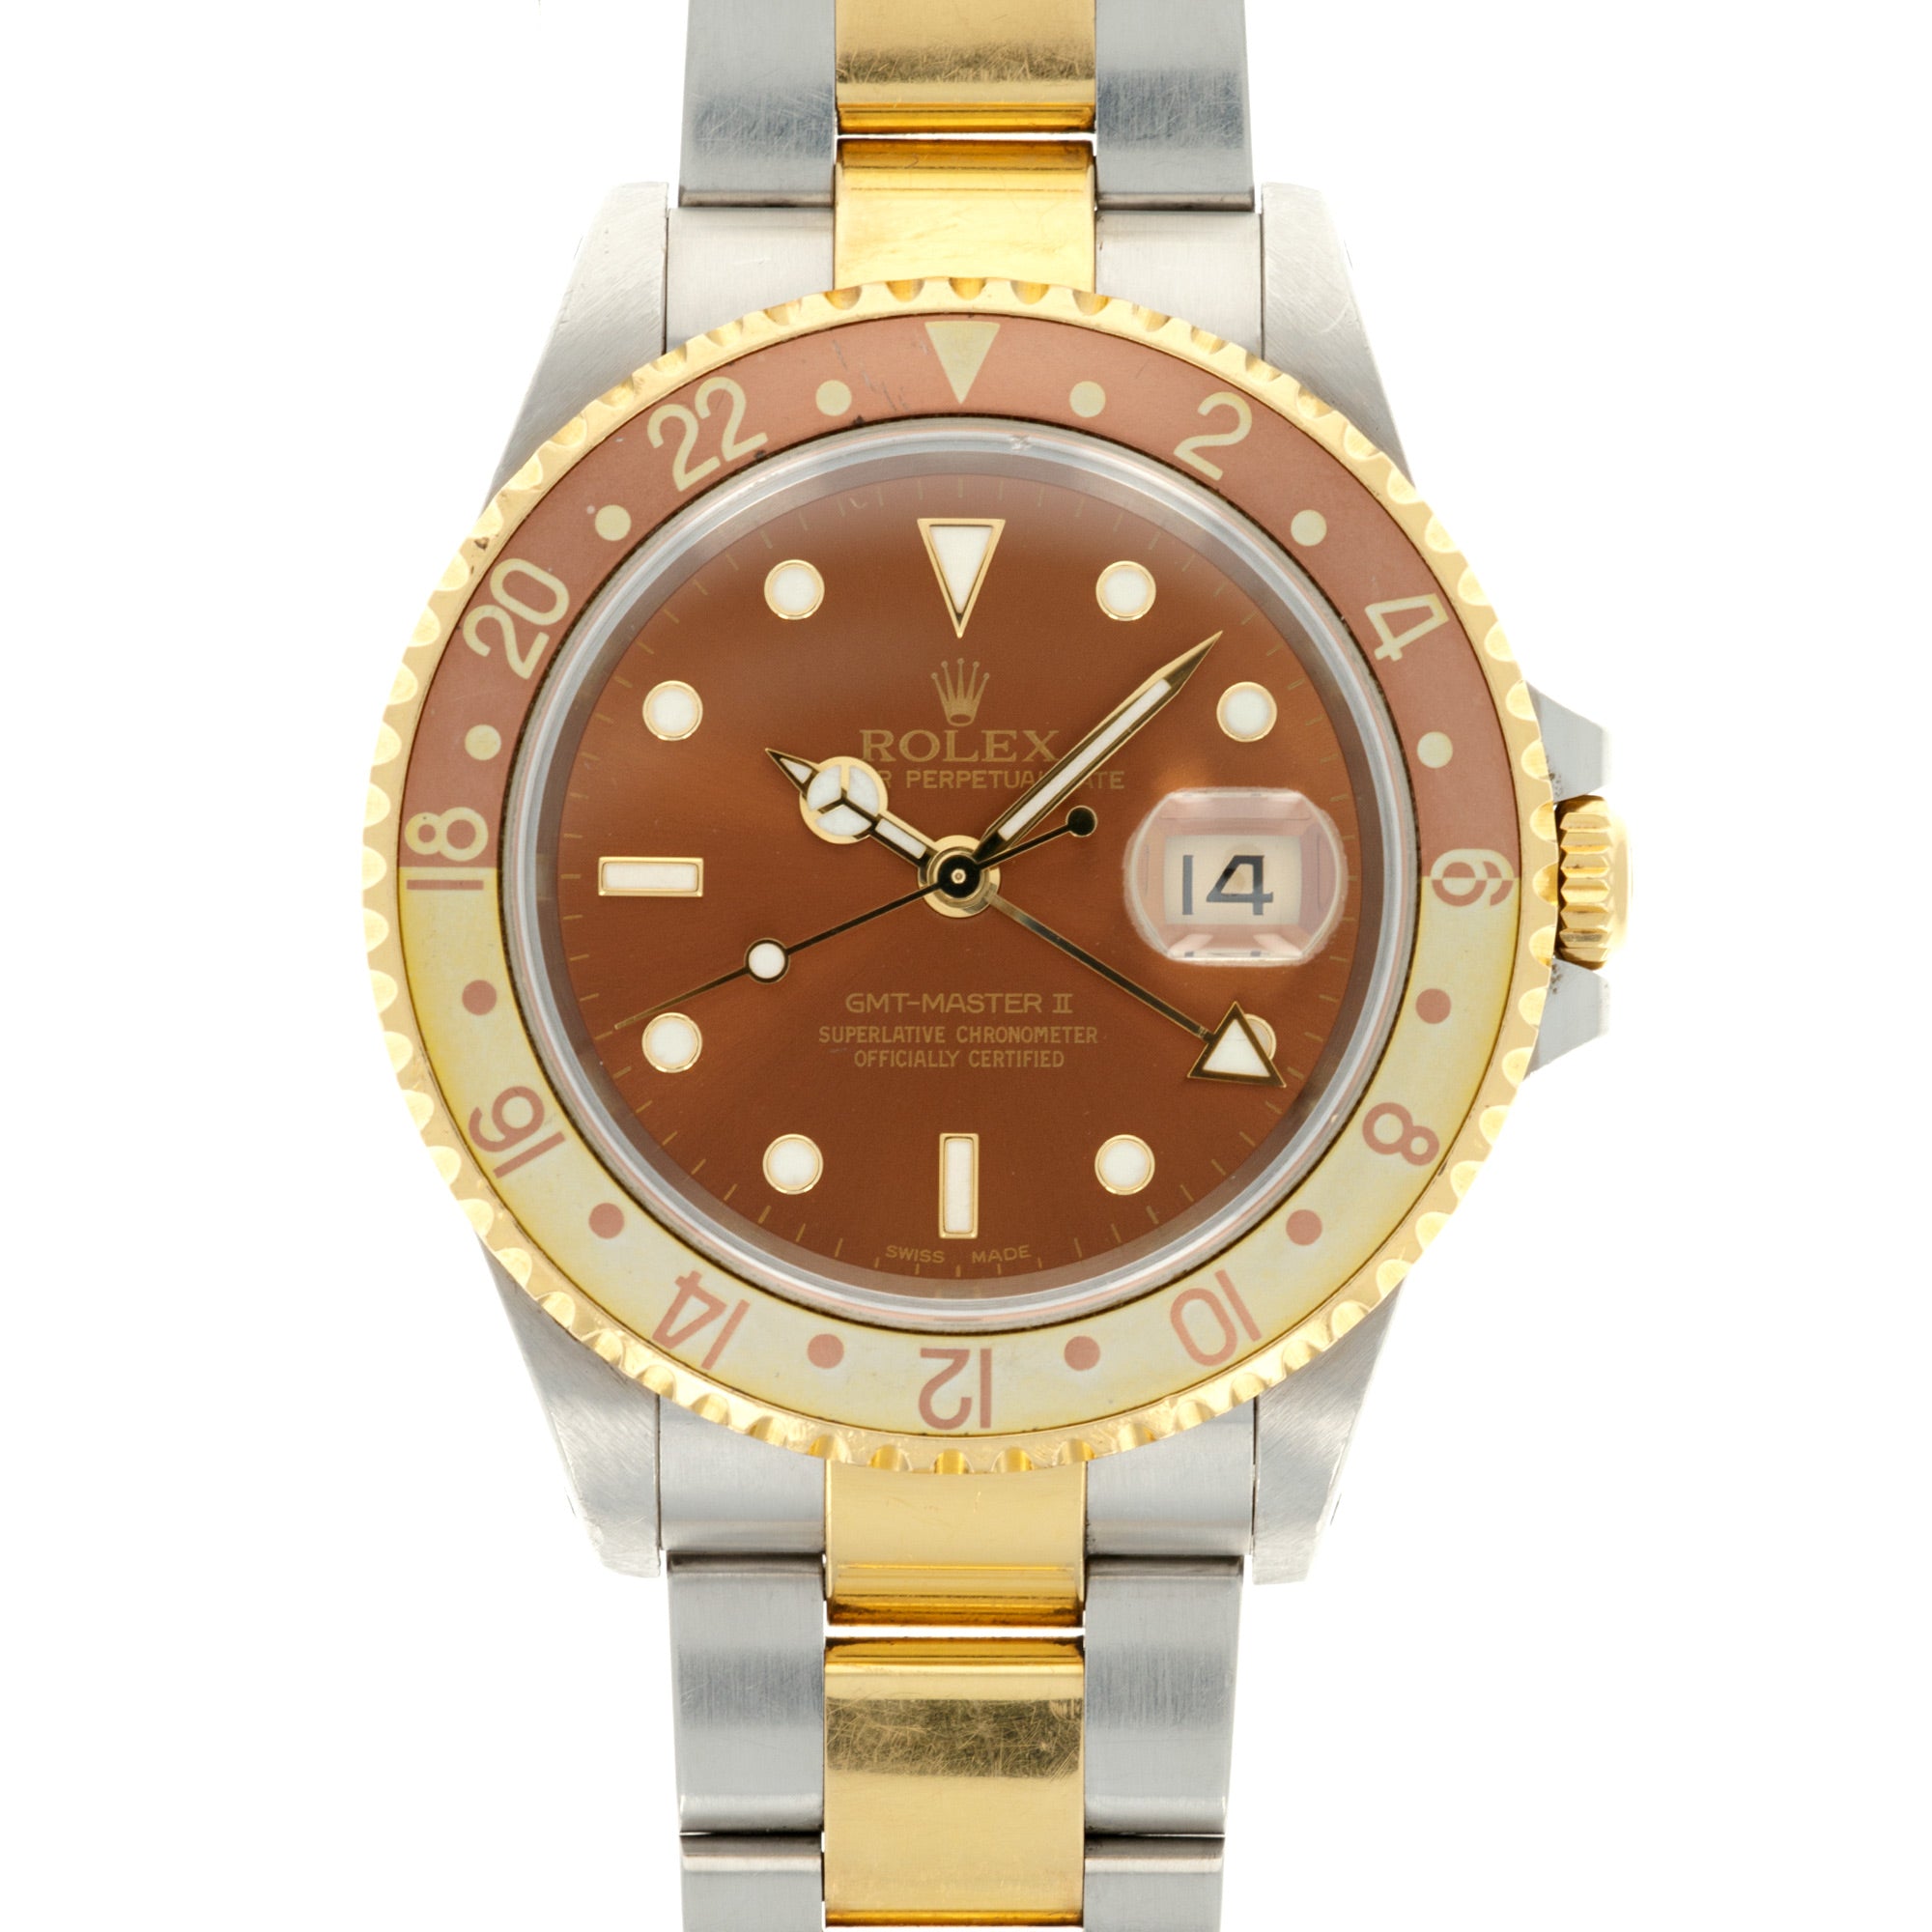 Rolex - Rolex Two Tone GMT-Master Ref. 16713 with Original Warranty and Hang Tag - The Keystone Watches